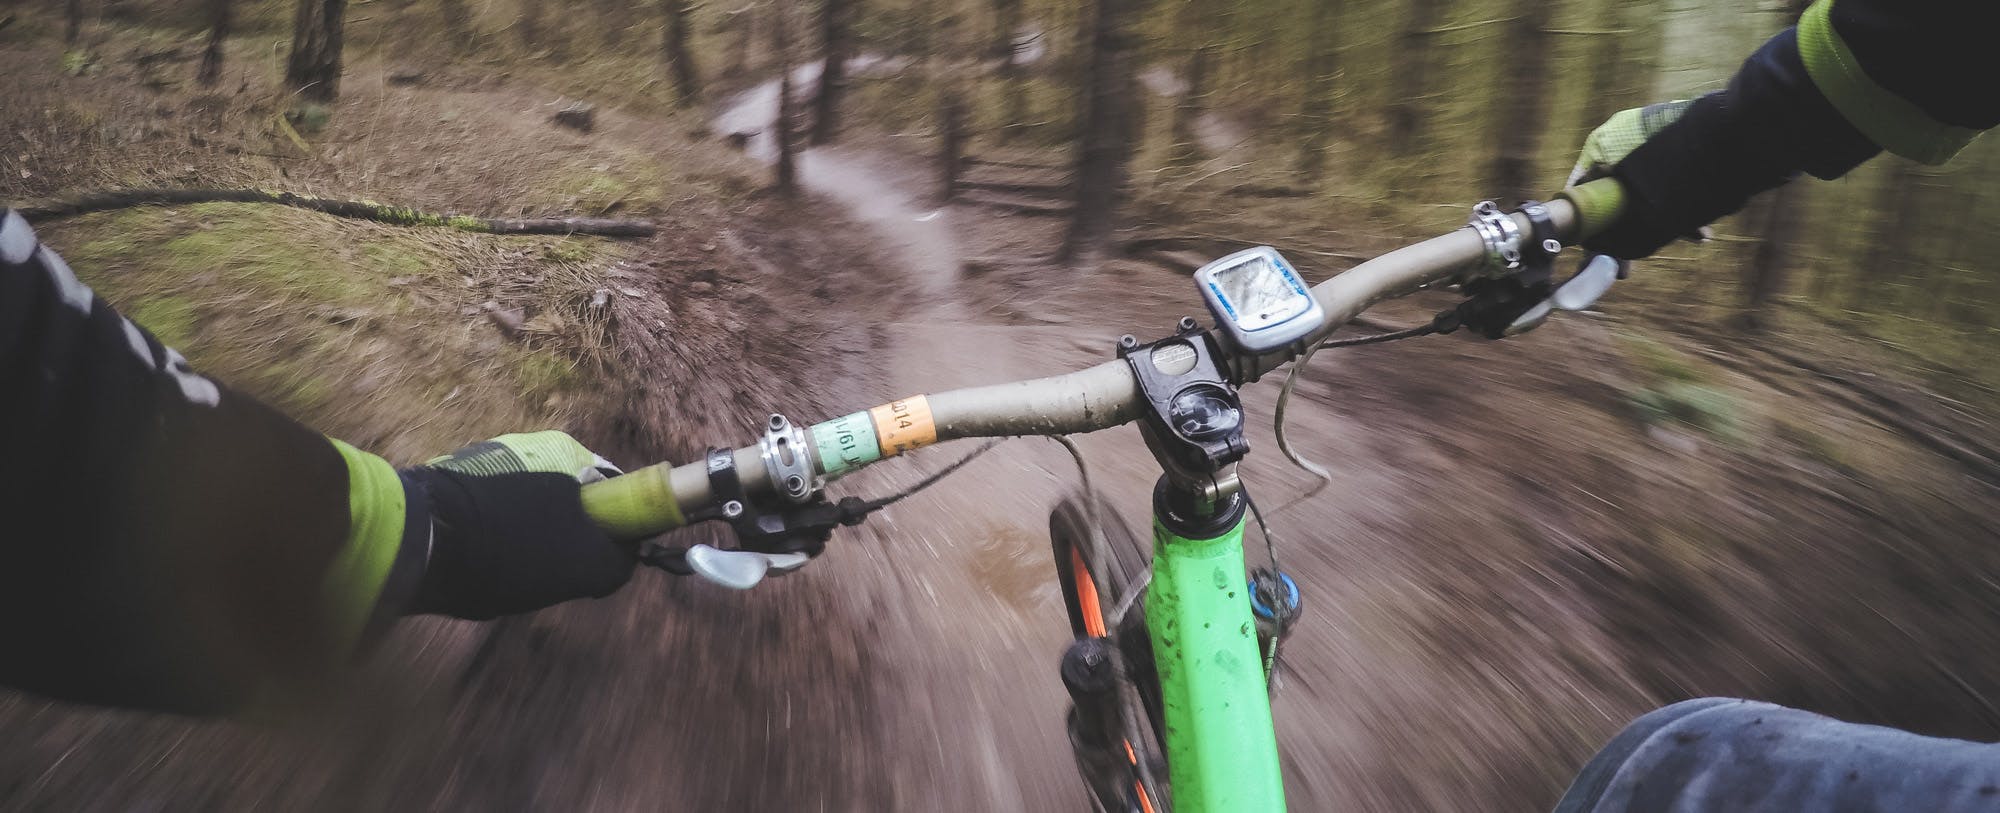 Float Your MTB Boat:  Winter Park, Colorado Leads Out On Trails, Events